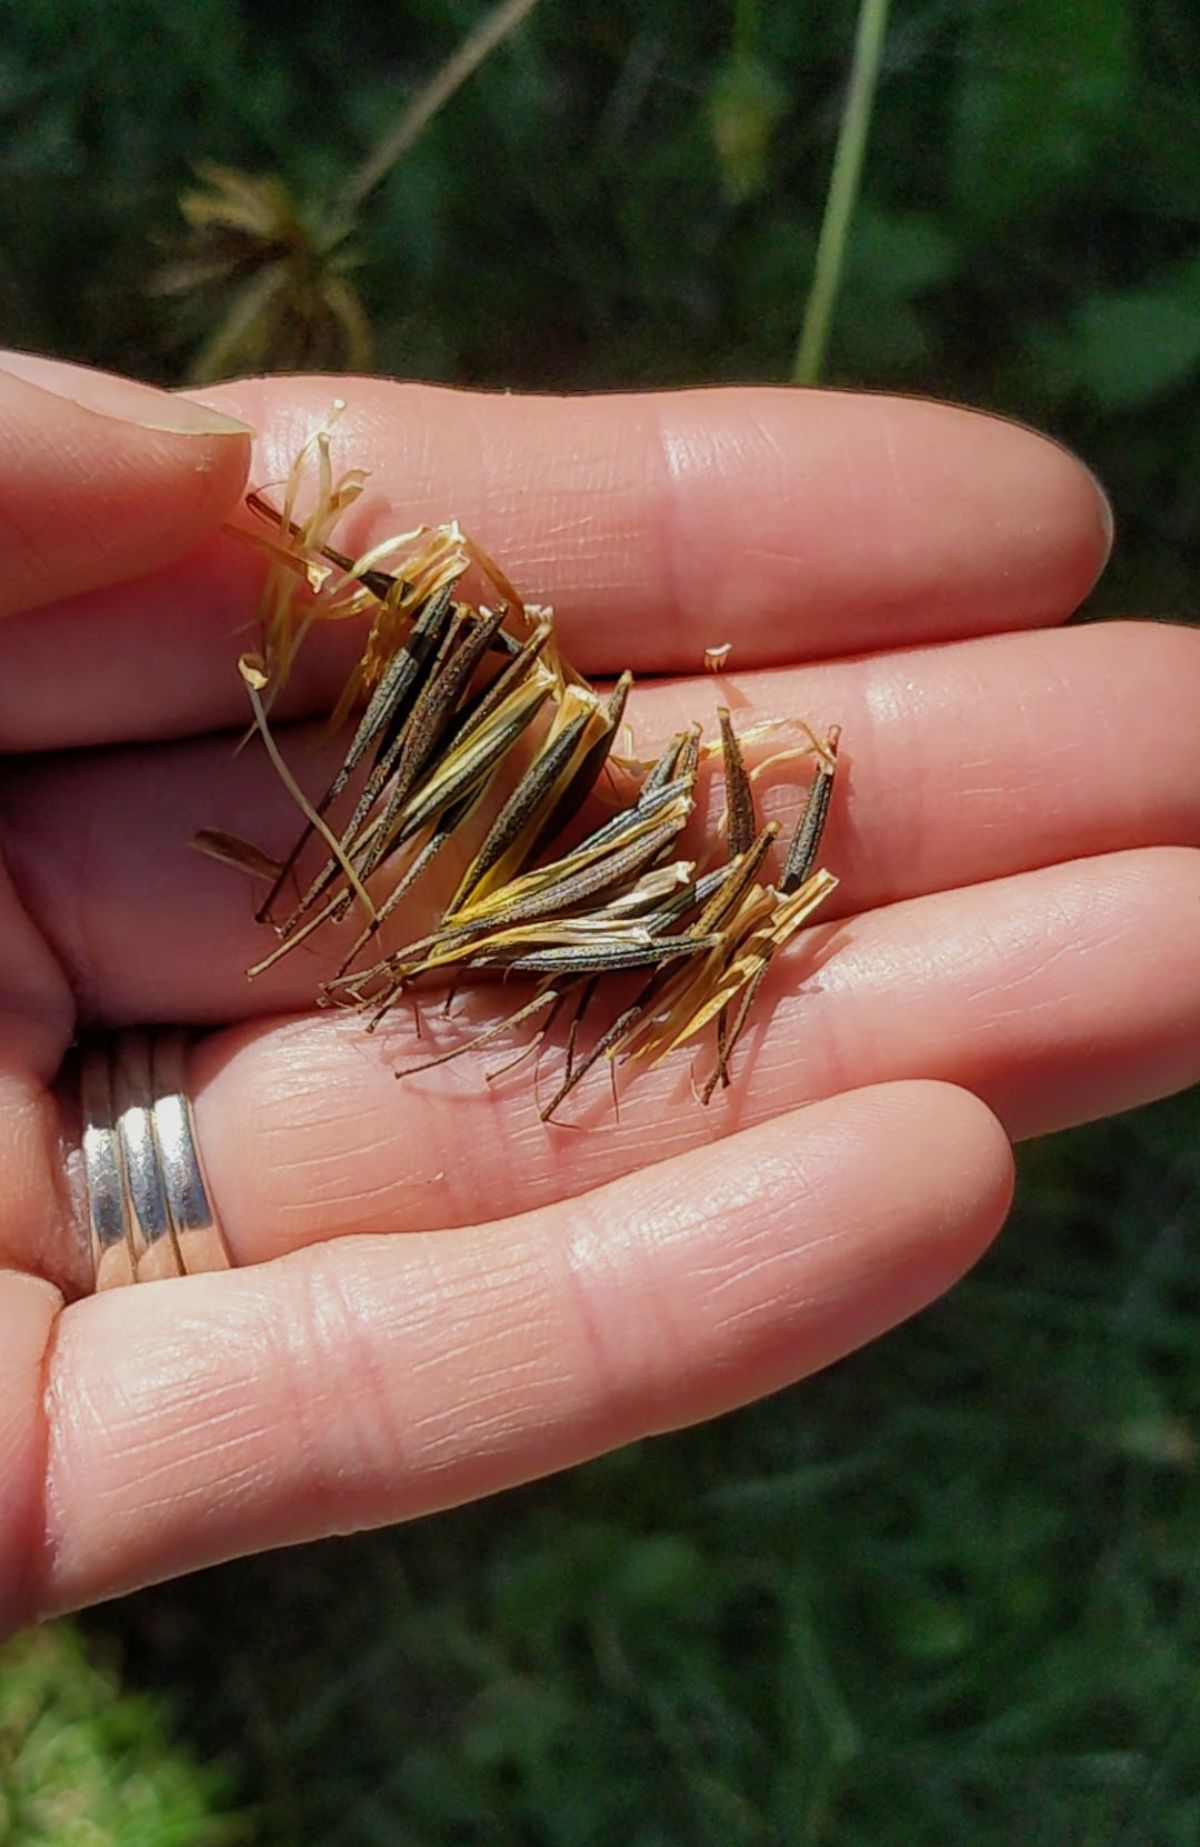 Getting ready to direct sow cosmo seeds - hand holding many seeds